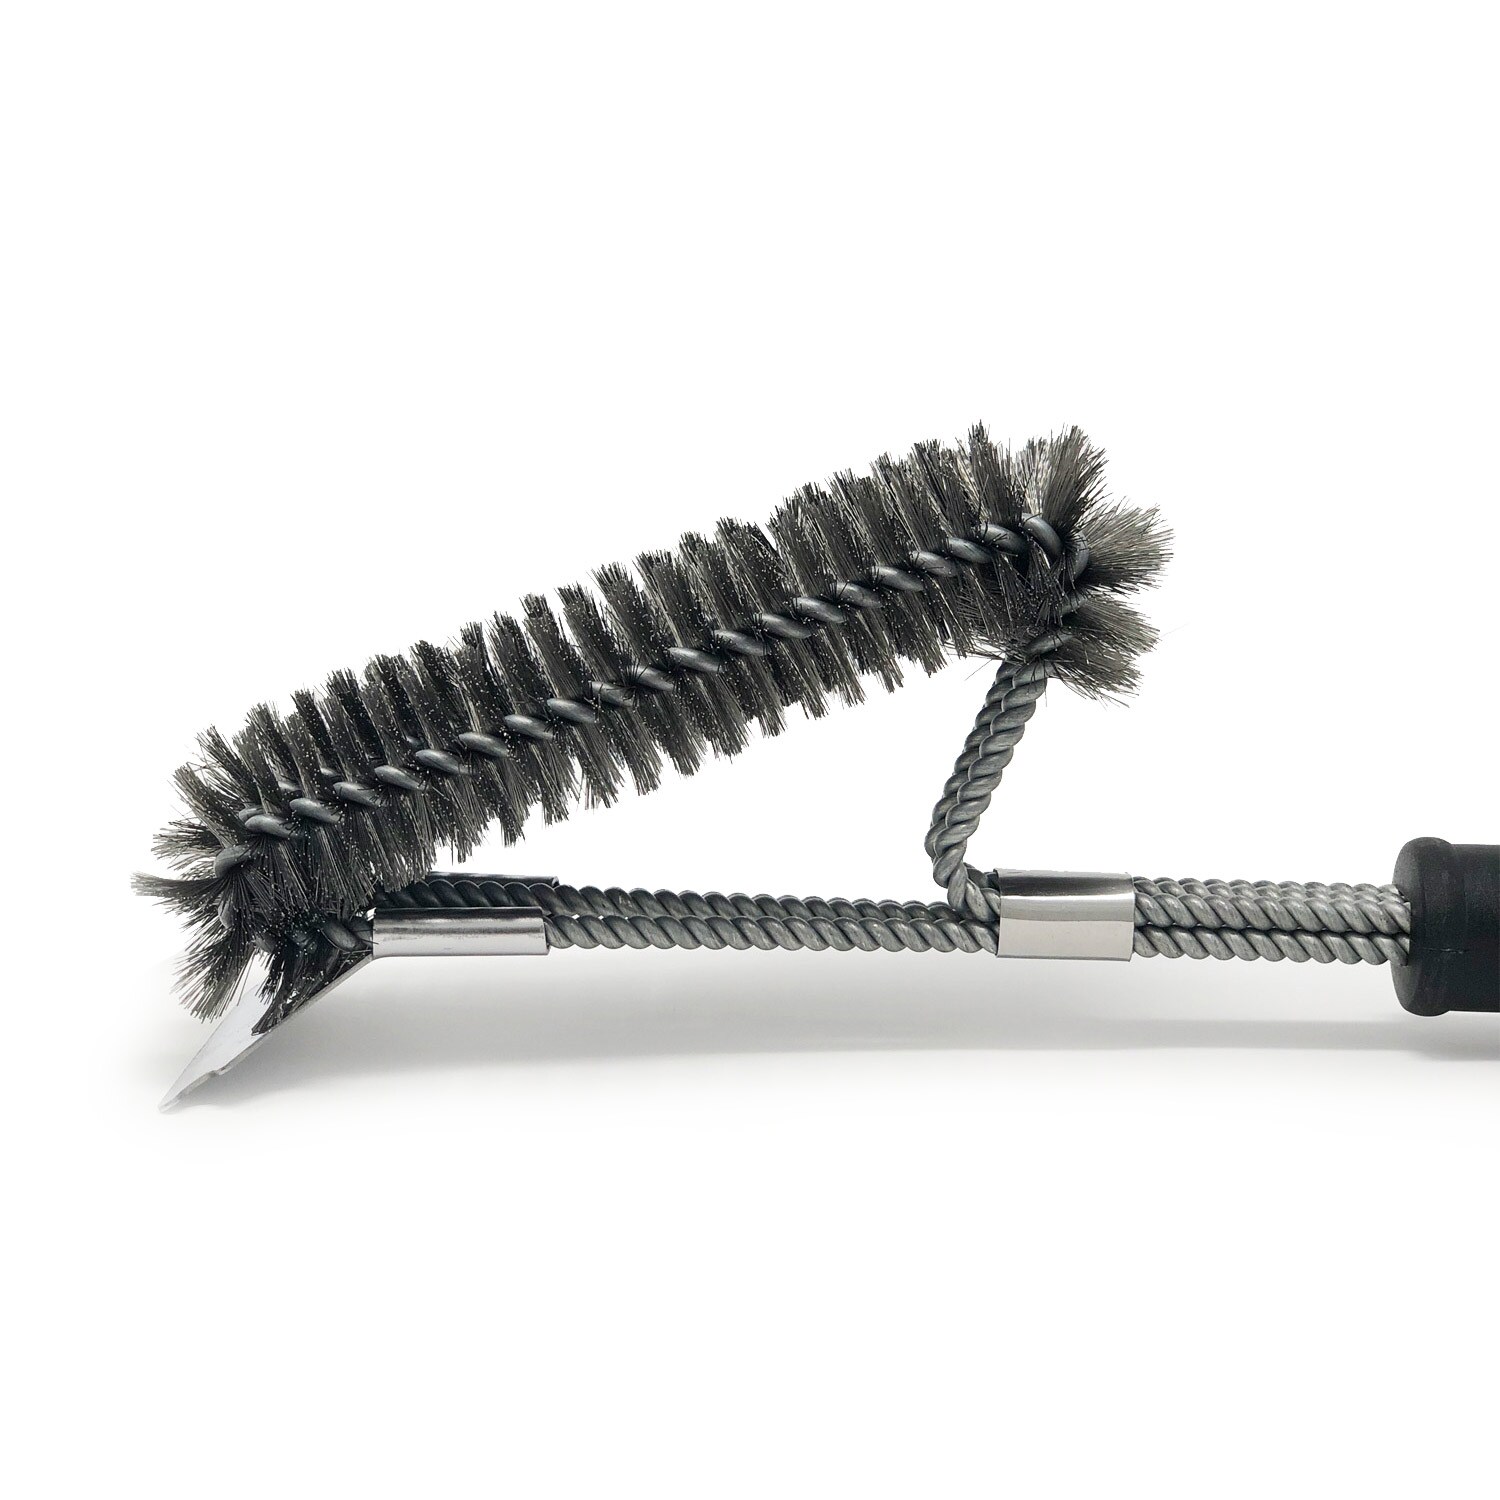 GRILLART Grill Brush and Scraper with Deluxe Handle, Safe Wire